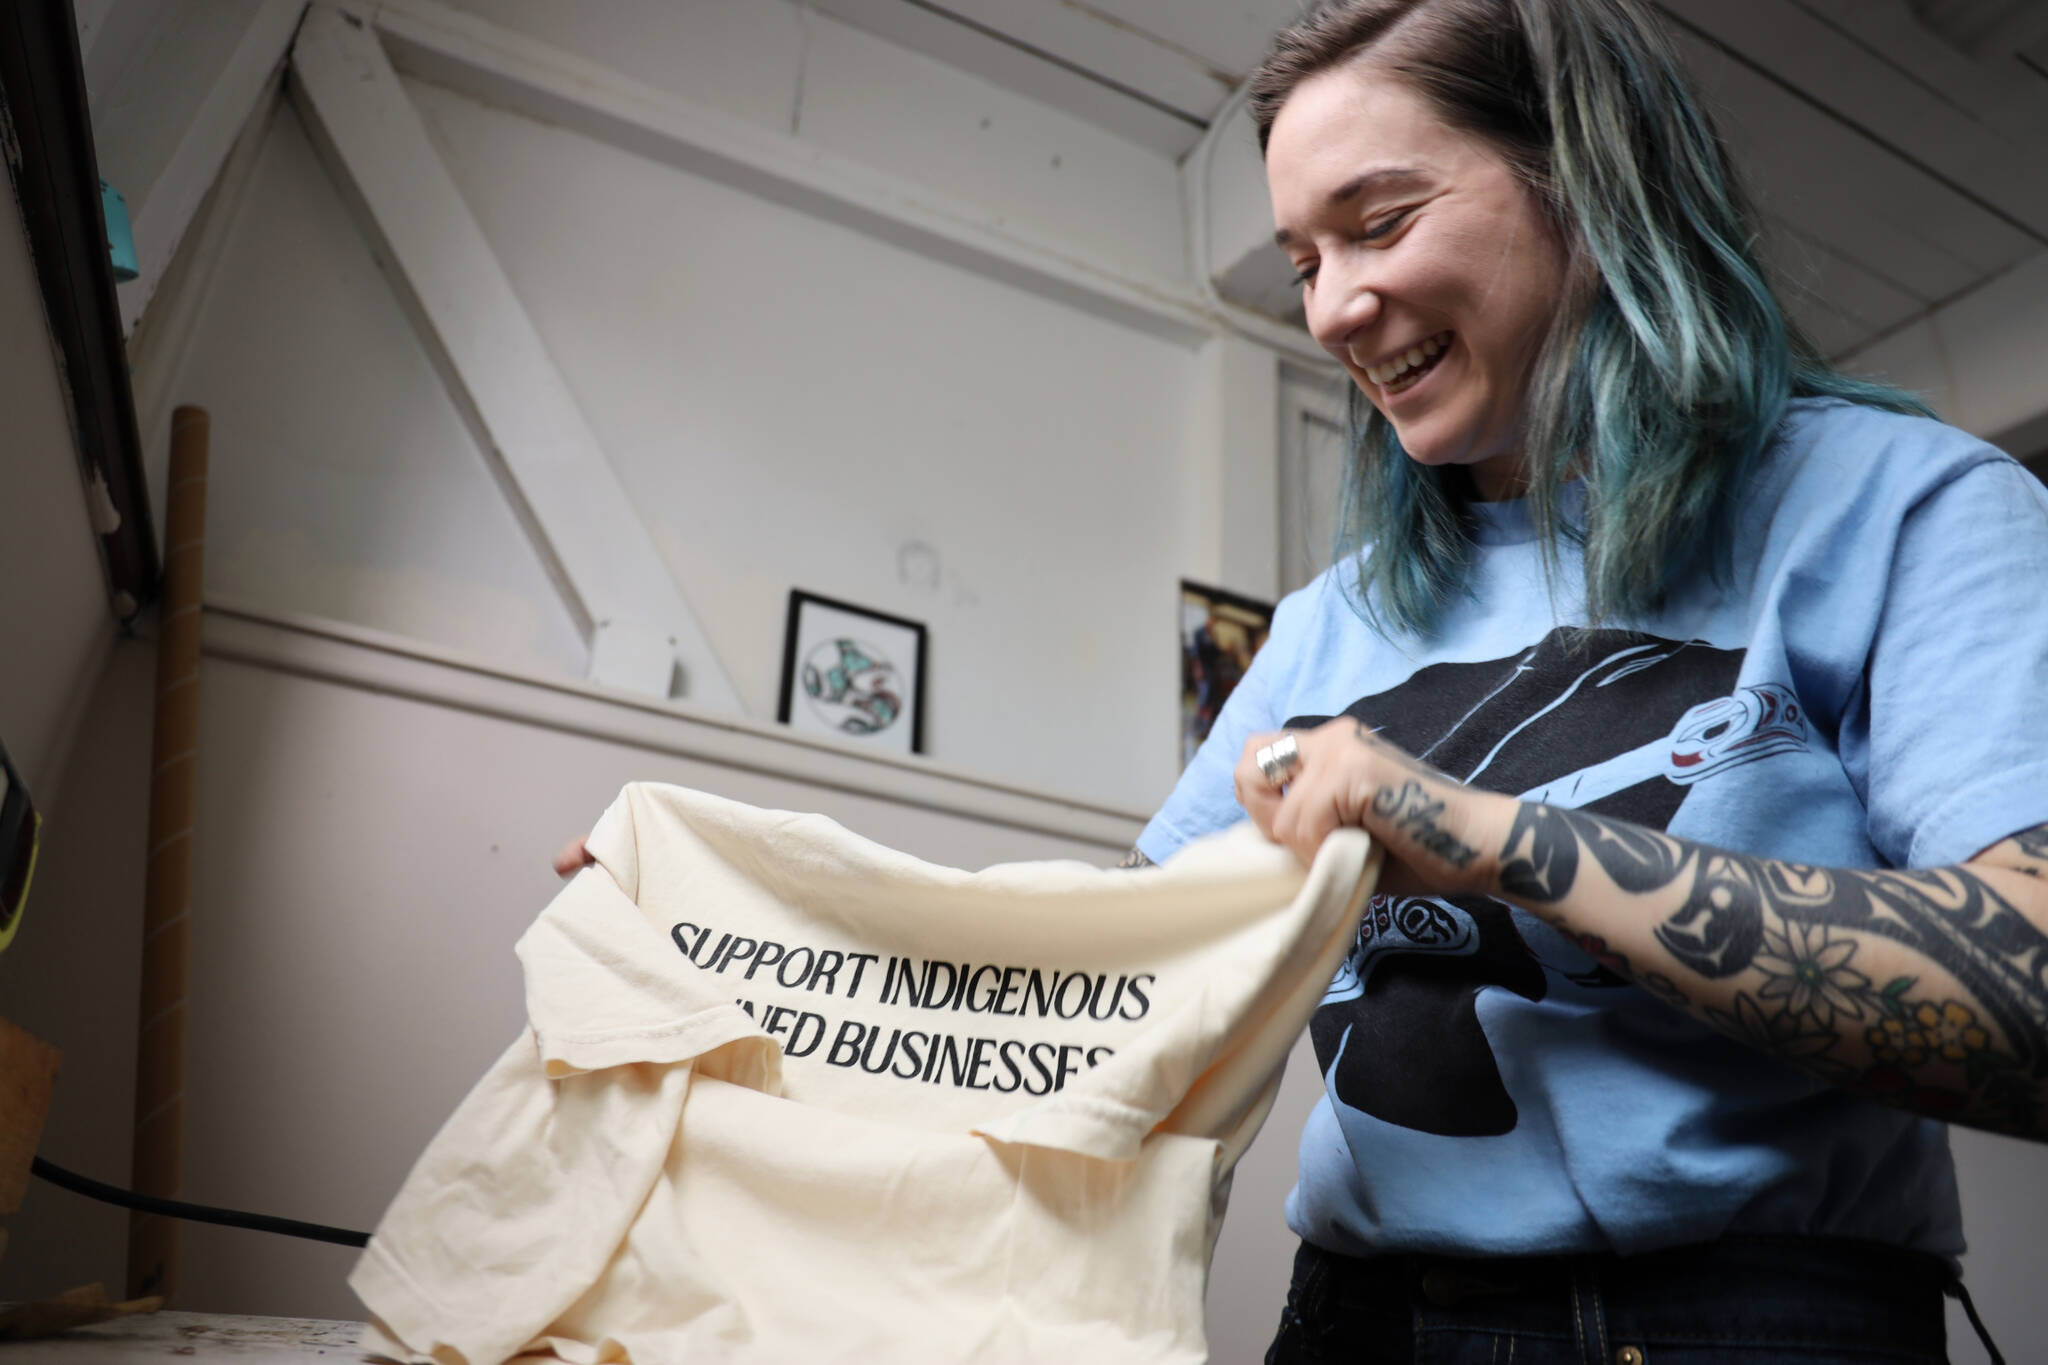 Chloey Cavanaugh, owner of Black and White Raven Co., folds a shirt at her downtown studio Monday morning. Cavanaugh’s company is an LGBTQ+ and Indigenous small business based in Juneau. (Clarise Larson / Juneau Empire)